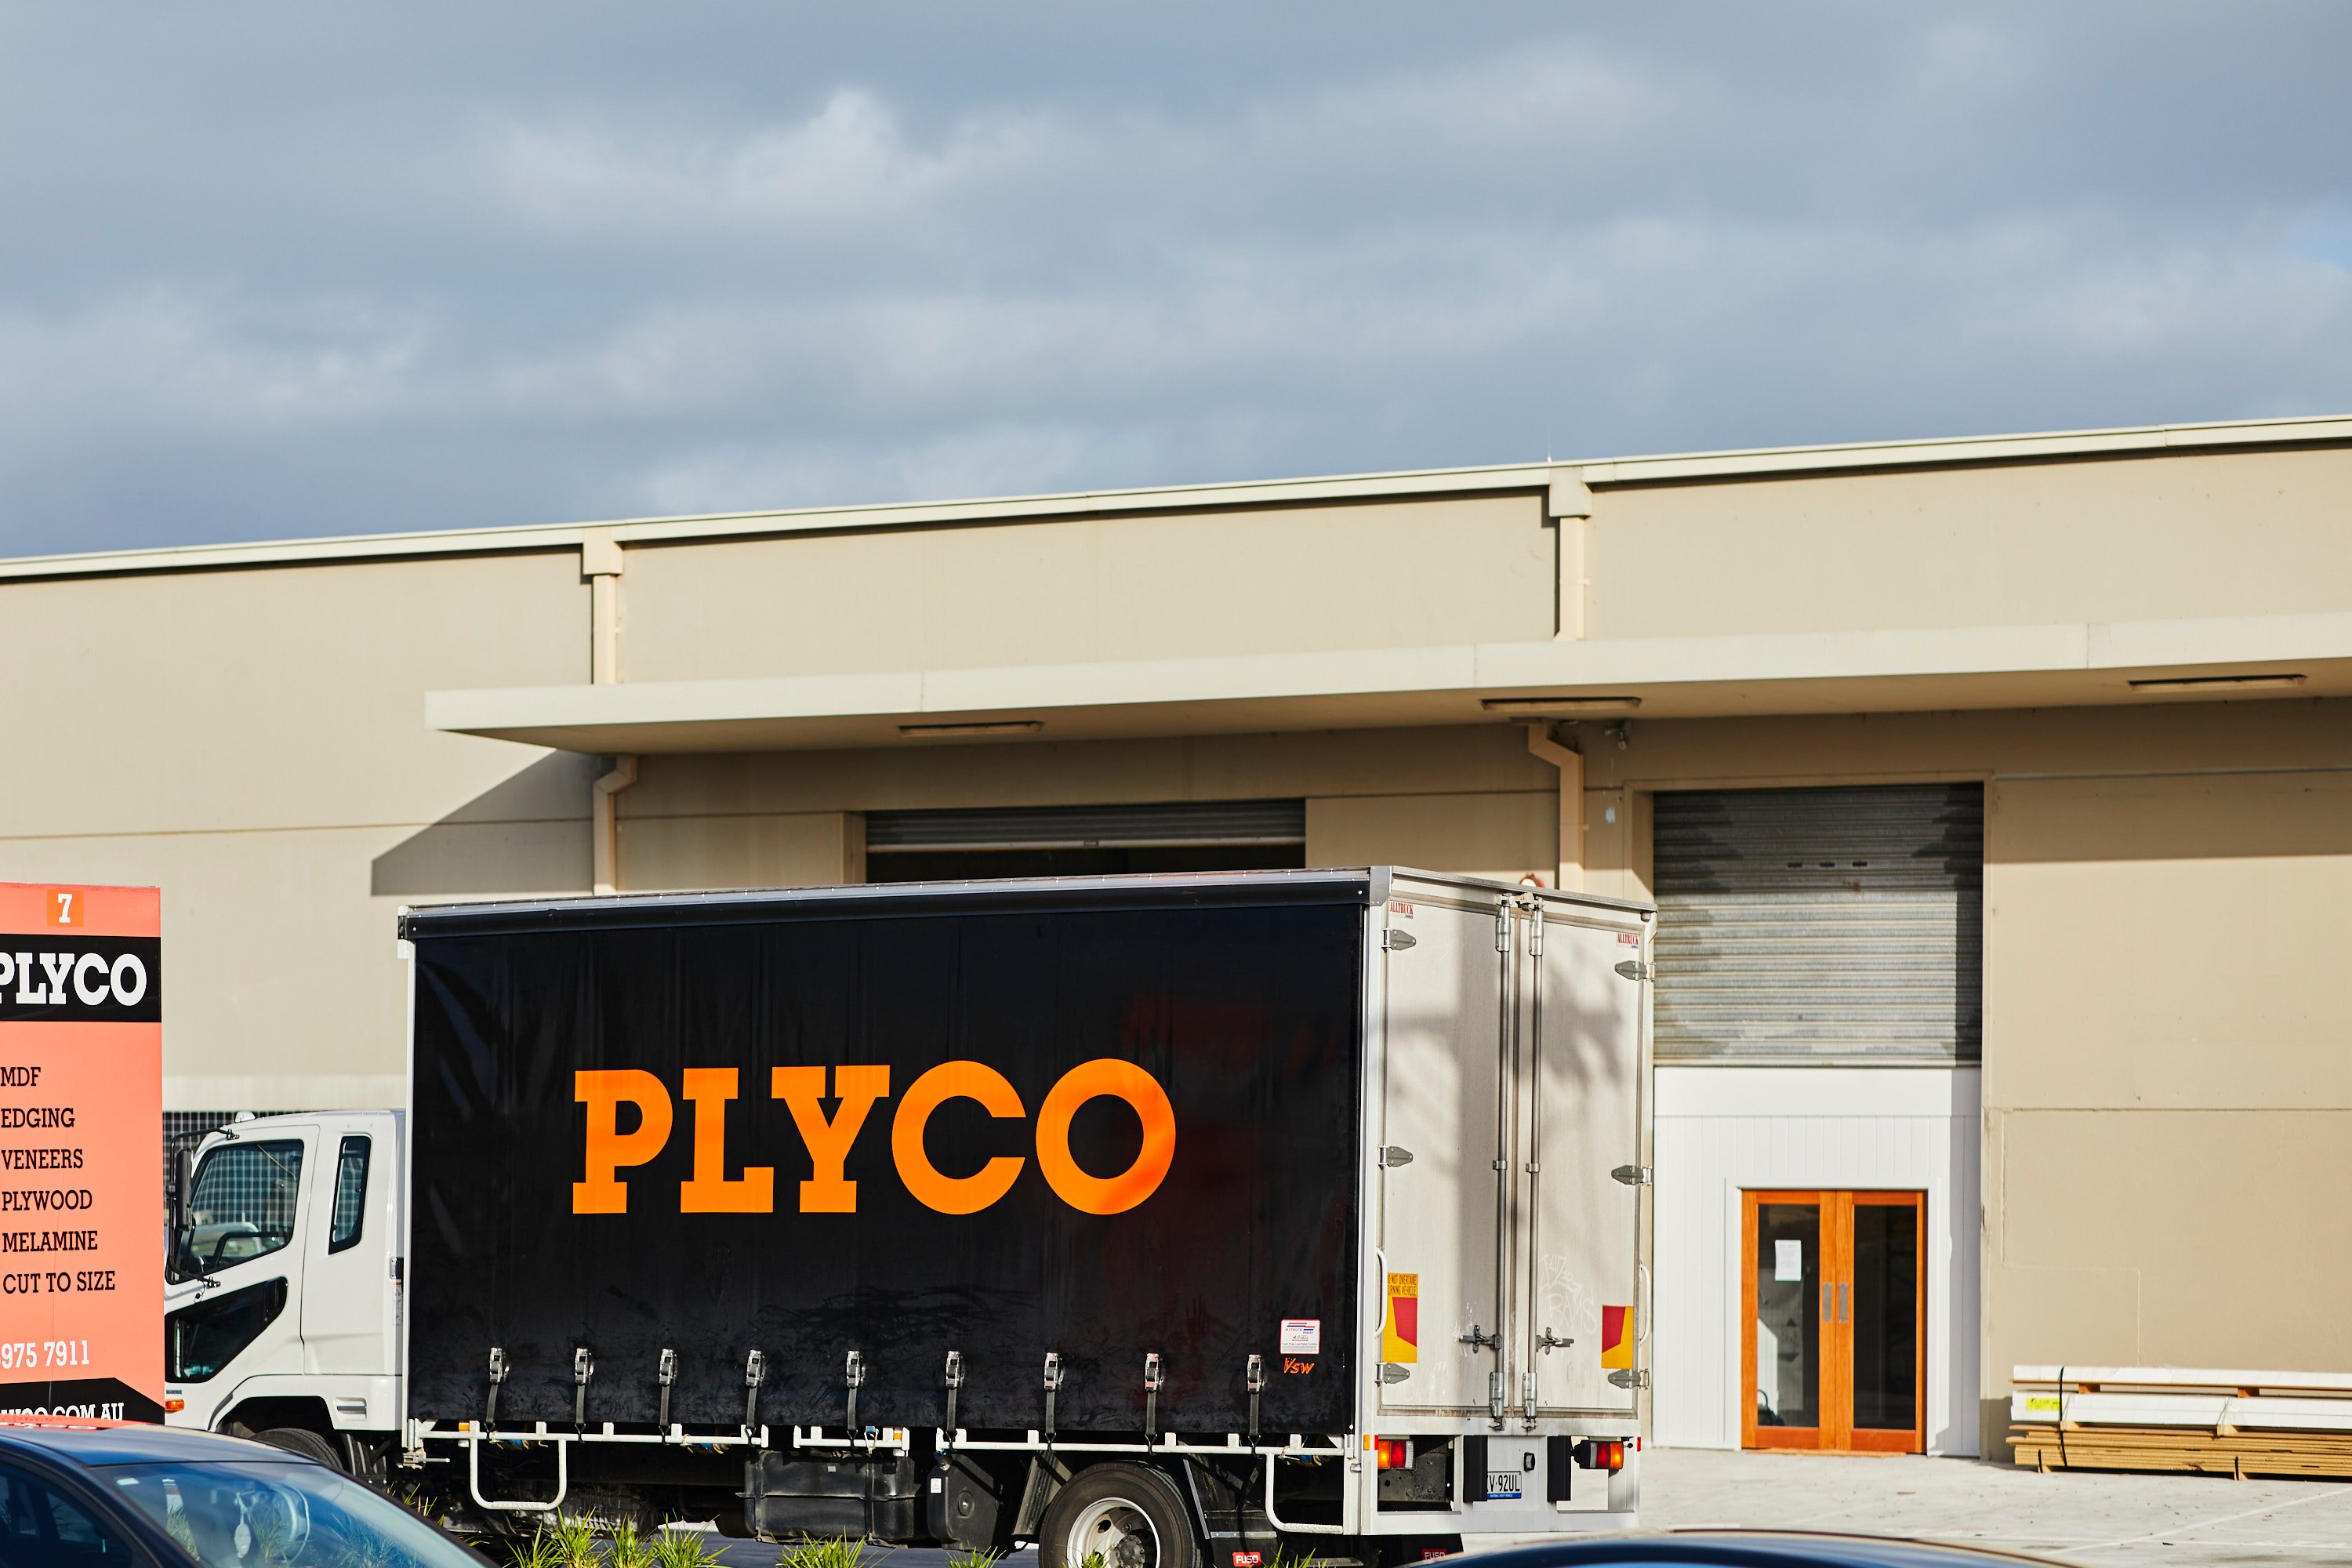 Plyco plywood delivery truck and factory exterior at Plyco Mornington